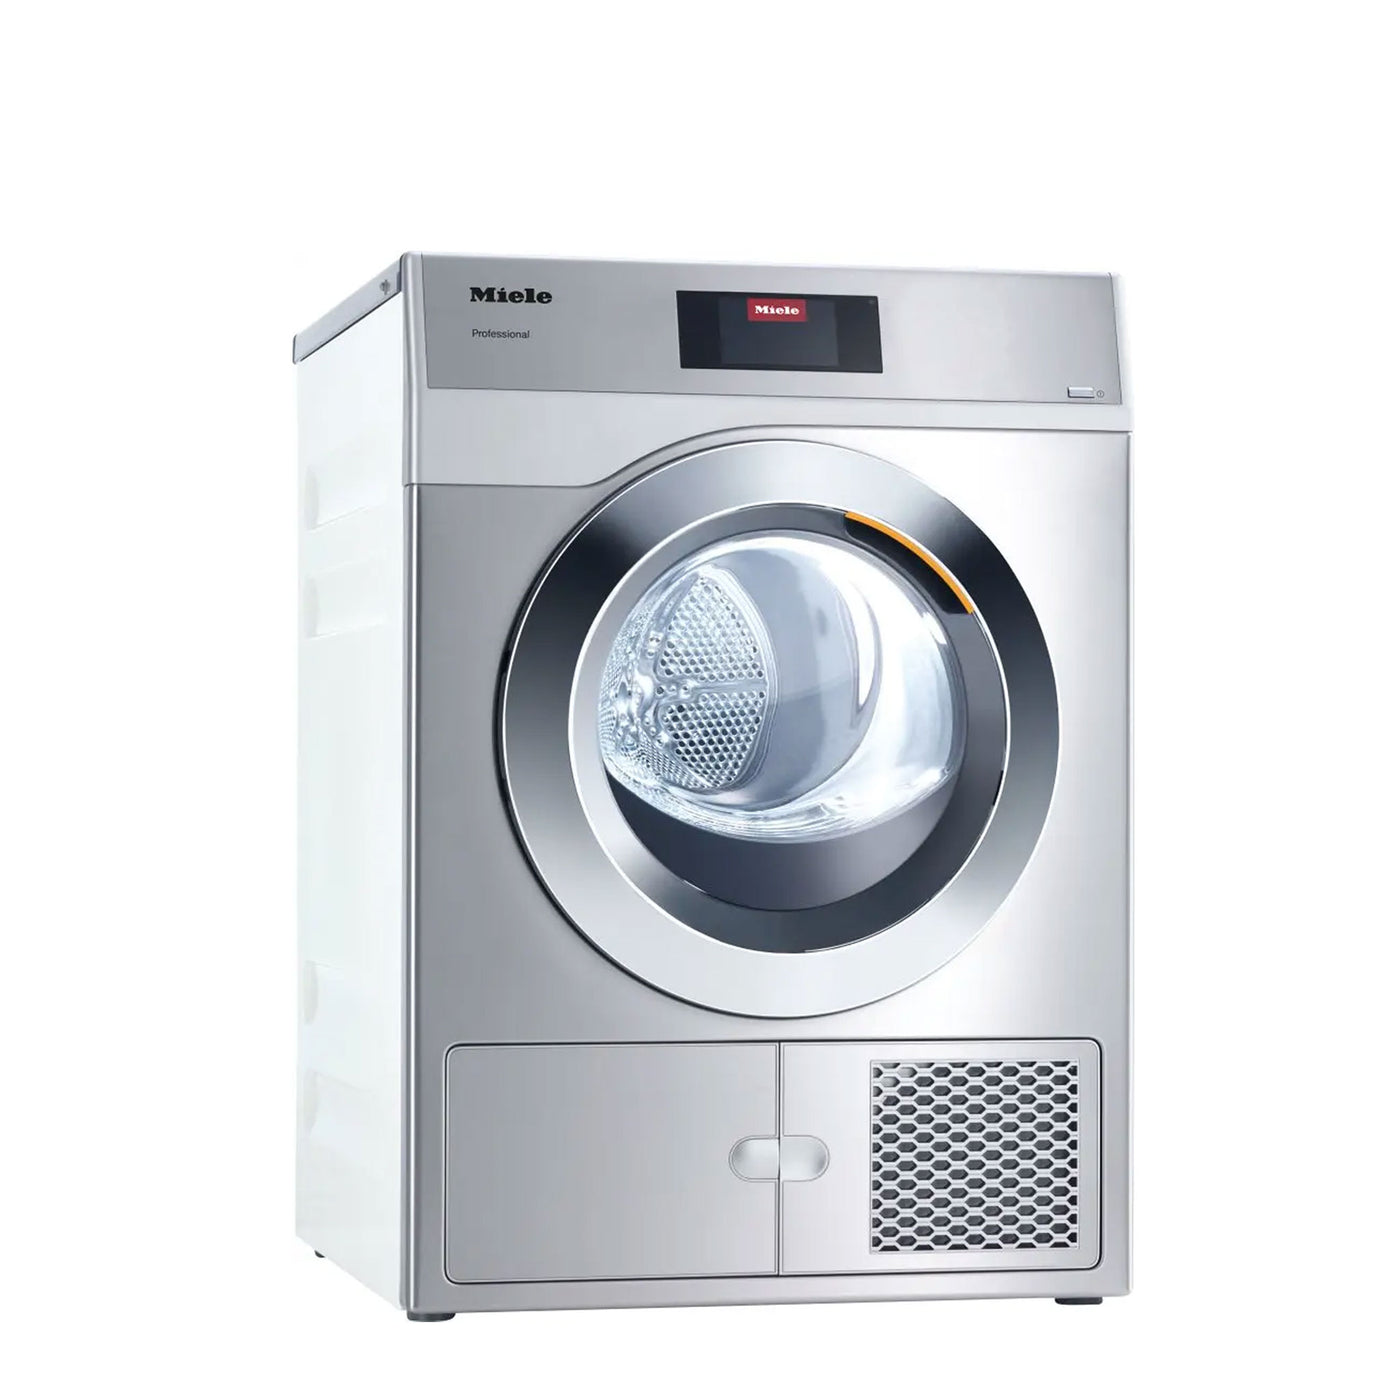 Miele-Dryer-PDR908HP Space Saver 33" Tall